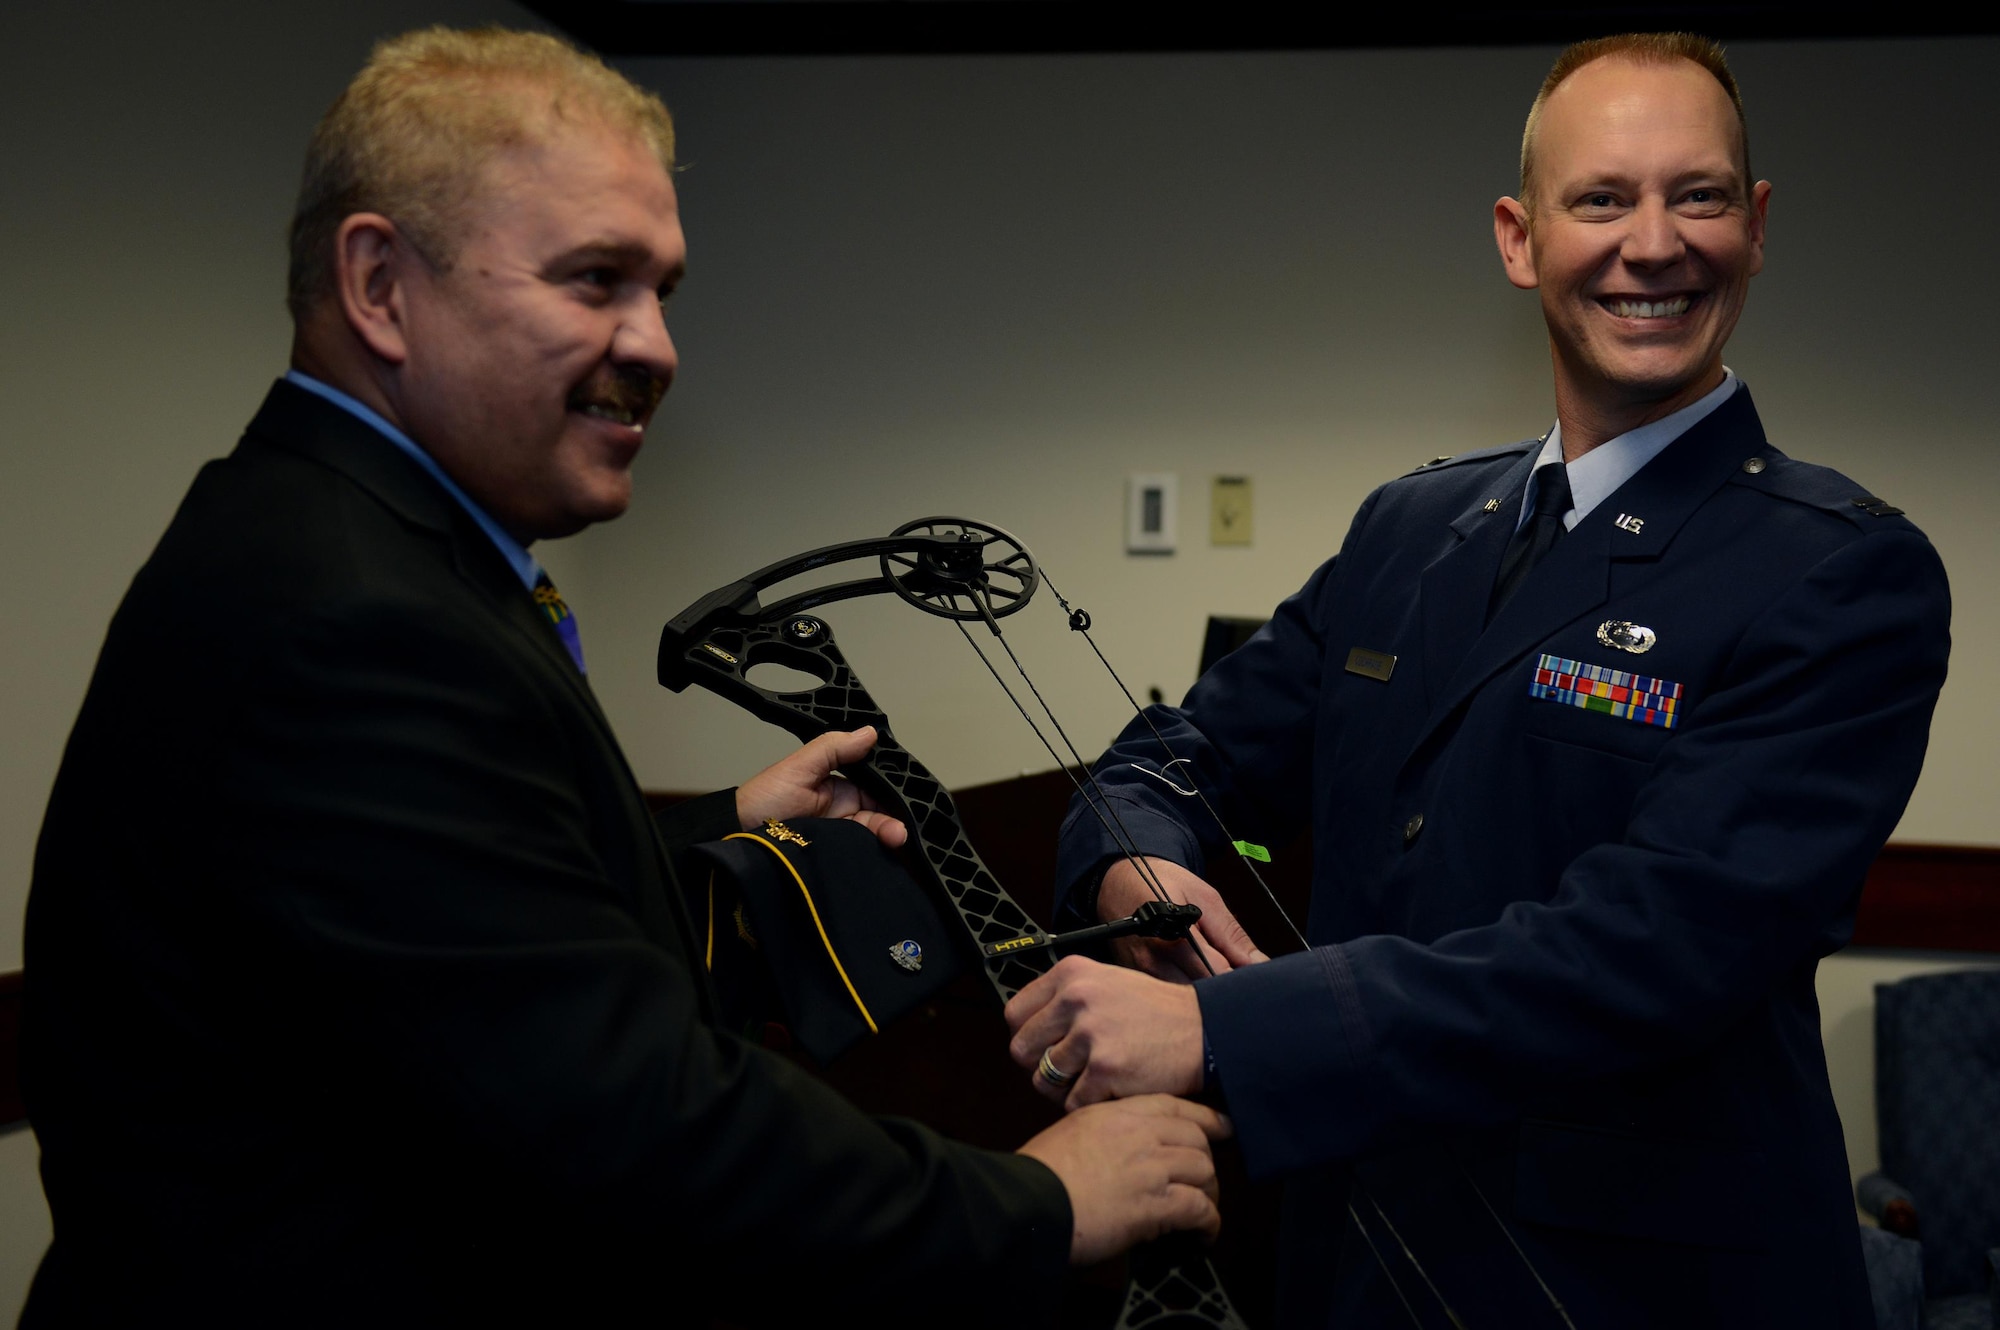 Albert Diaz, American Legion Florida Veterans Service Director, presents Capt. Chris Cochrane with an adaptive compound bow at Hurlburt Field, Fla., Jan 28, 2016. Cochrane, an Air Force Special Operations Command Wounded Warrior, suffered a stroke in 2013 that left him paralyzed on his right side. Cochrane, with his new bow, plans to participate in the upcoming Air Force Wounded Warrior trails at Nellis Air Force Base, Nev., in February. (U.S. Air Force photo/Chief Master Sgt. Quinton T. Burris) 